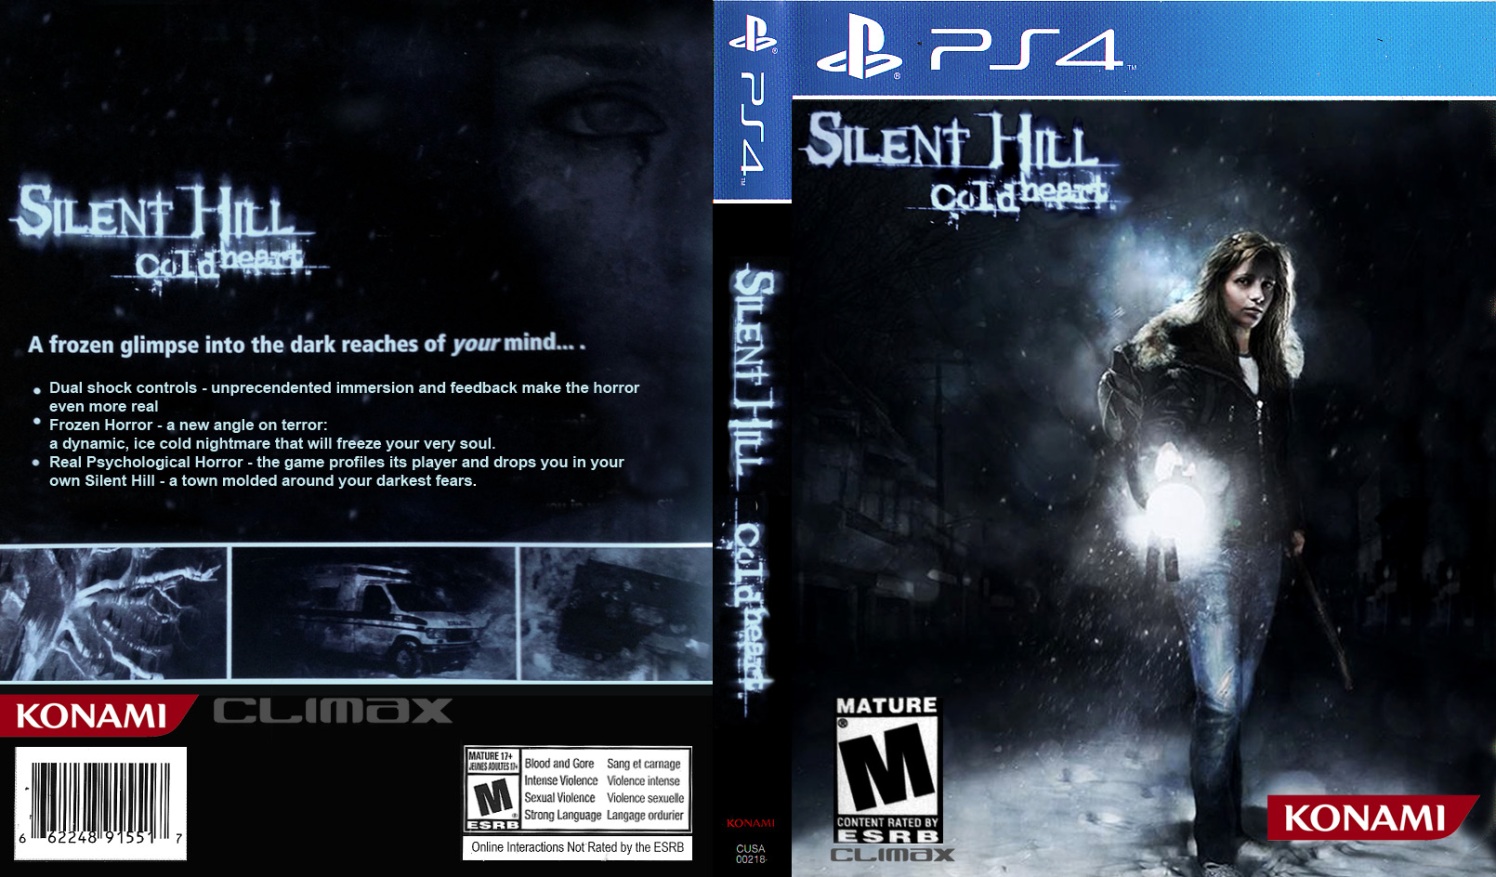 Silent Hill: Cold Heart - Climax Studios - Wii.